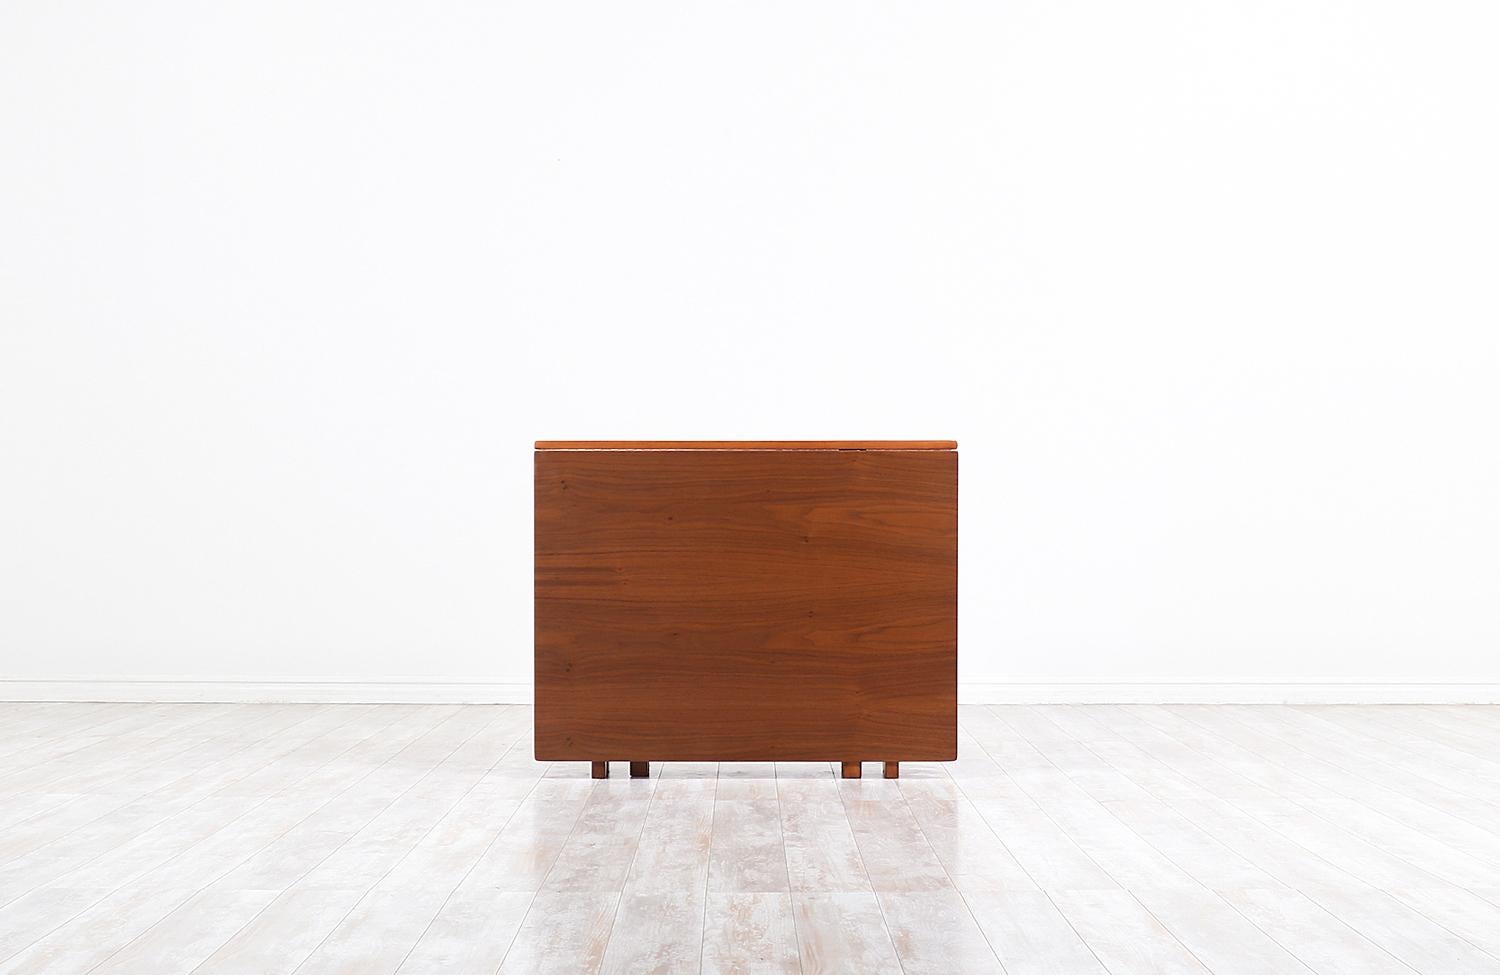 Stunning modern “Maria Flap” dining table designed by Bruno Mathsson for Karl Mathsson in Sweden, circa 1930s. This iconic Swedish Modern design features a stunning walnut wood top, a solid walnut-stained beechwood base, and brass hardware to give